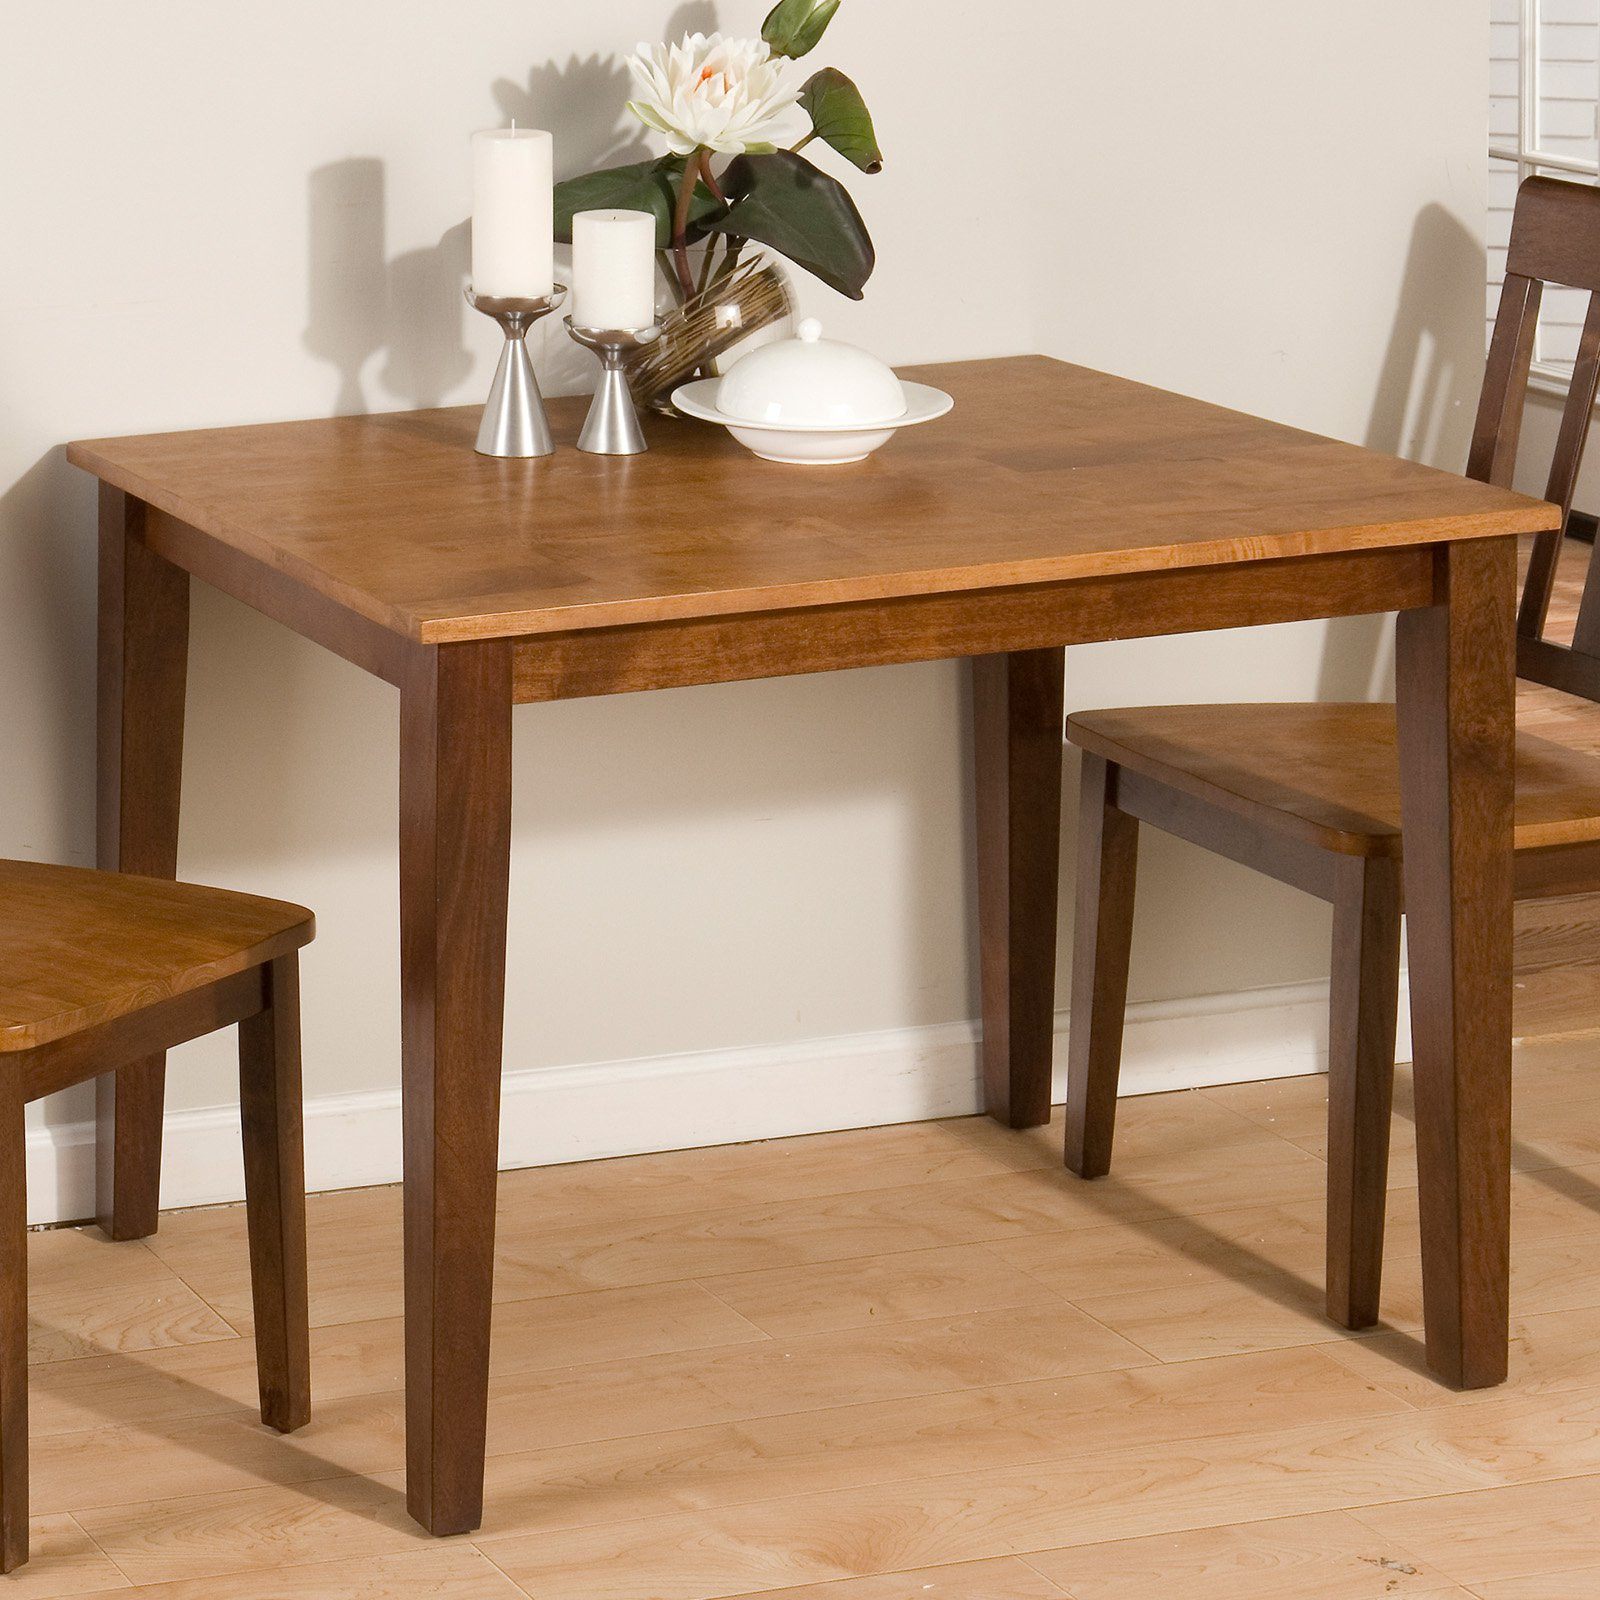 Small Kitchen Tables With Stools
 Small Rectangular Kitchen Table – HomesFeed